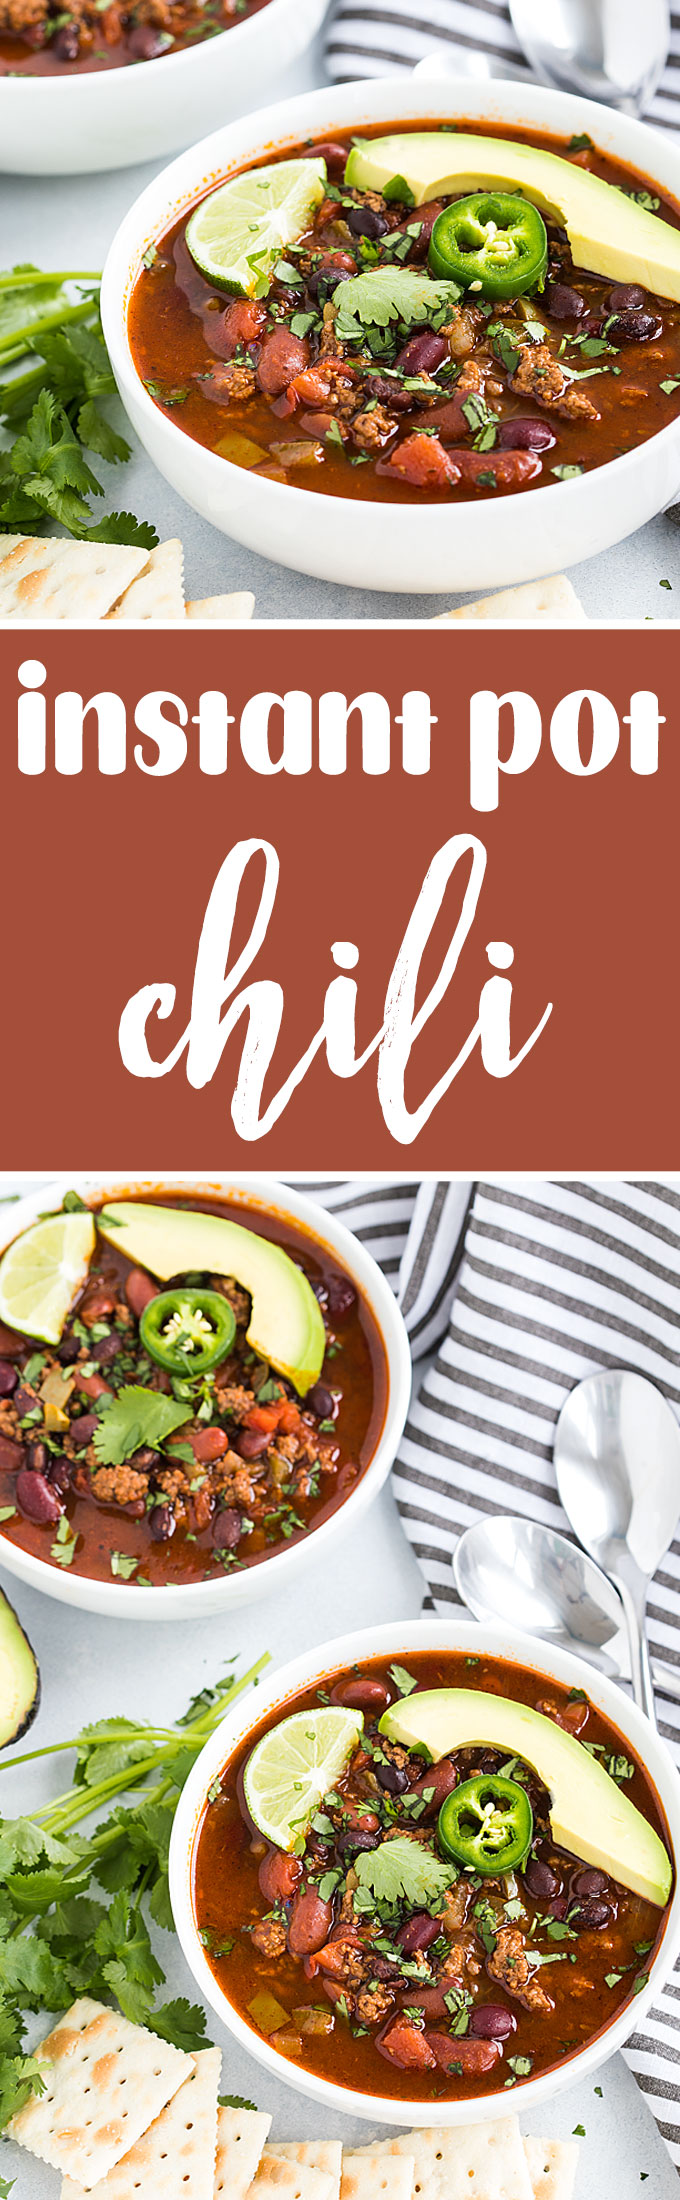 A two image vertical collage of instant pot chili with overlay text in the center.